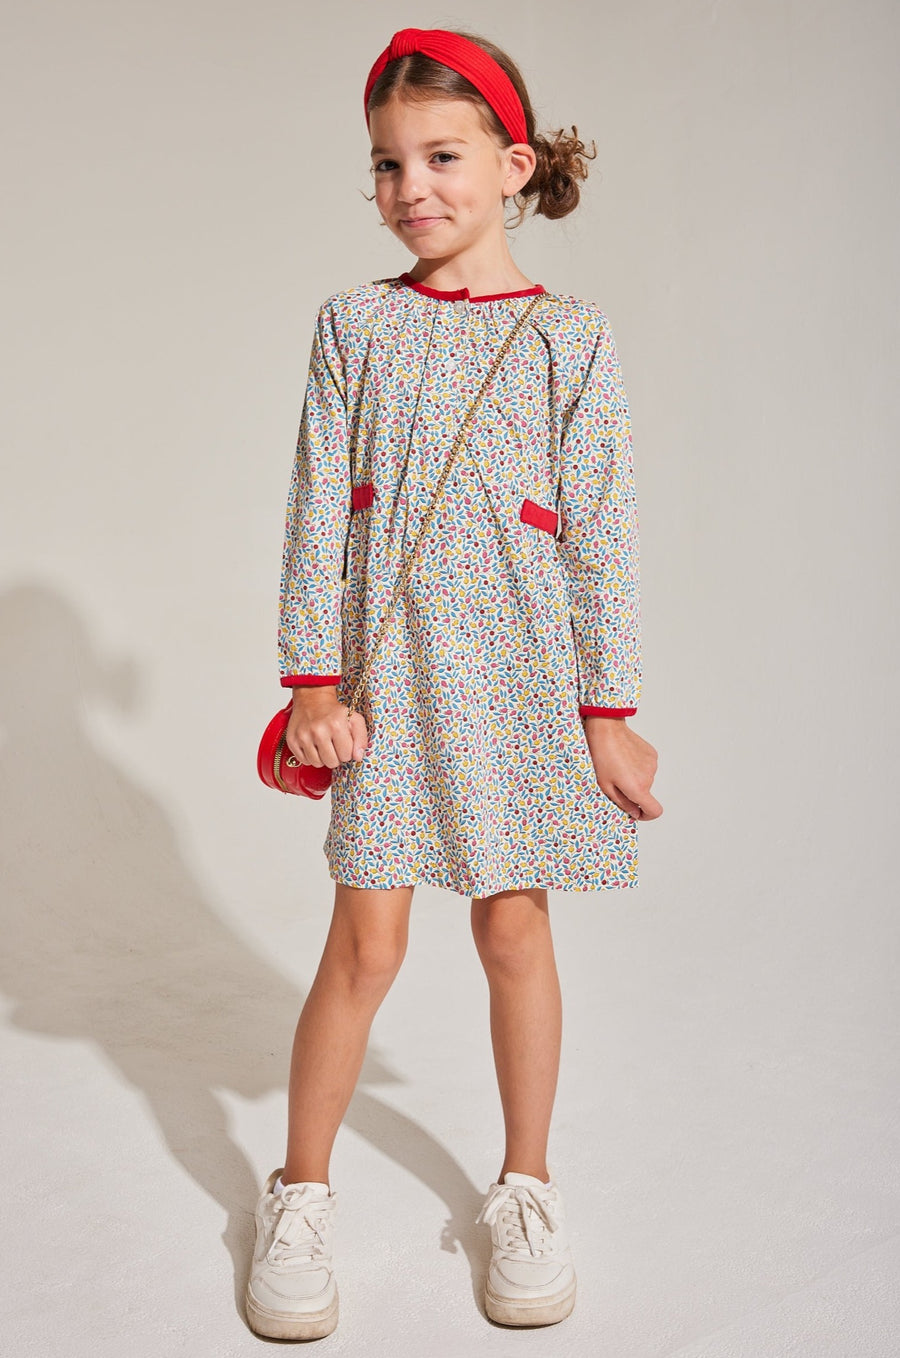 long sleeve dress for girls floral with red details for Christmas 